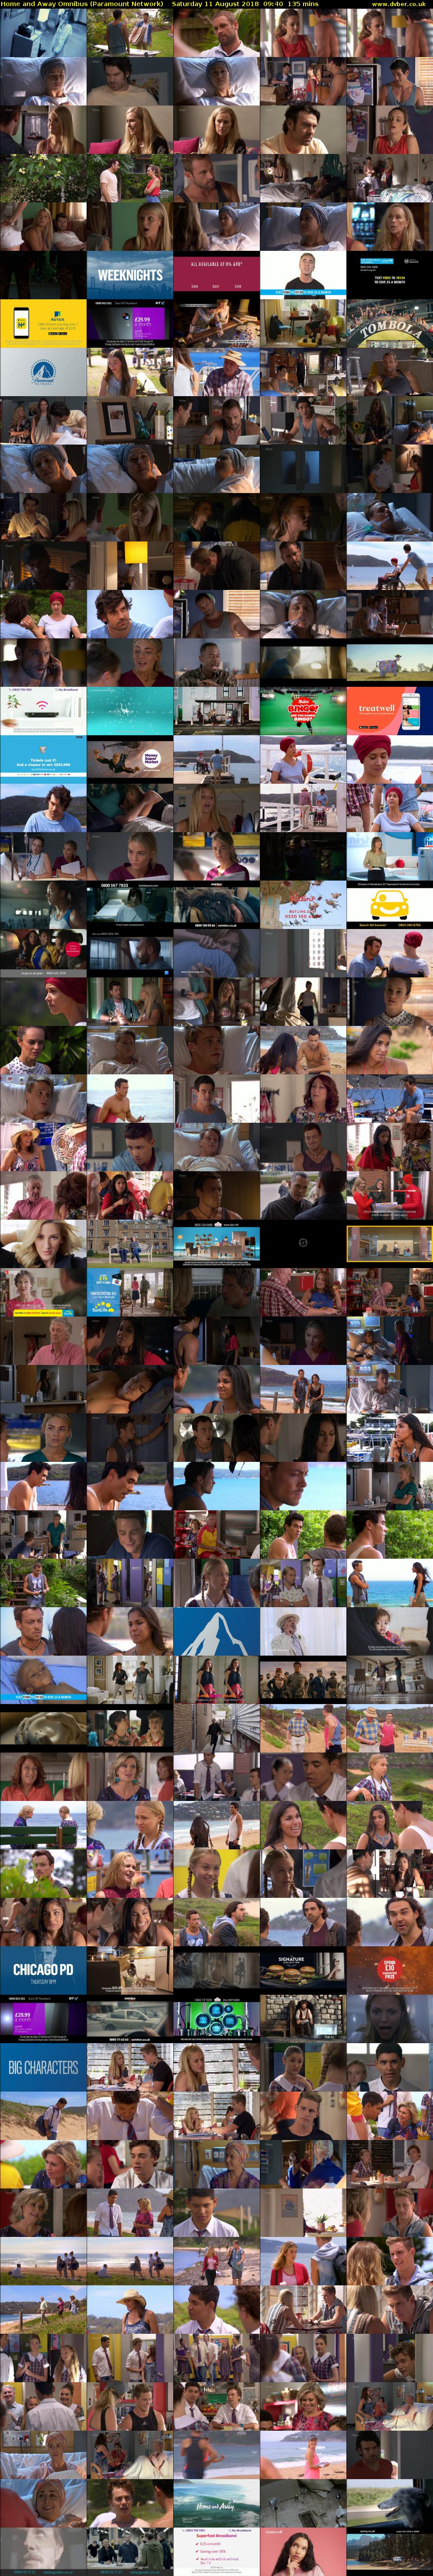 Home and Away Omnibus (Paramount Network) Saturday 11 August 2018 09:40 - 11:55